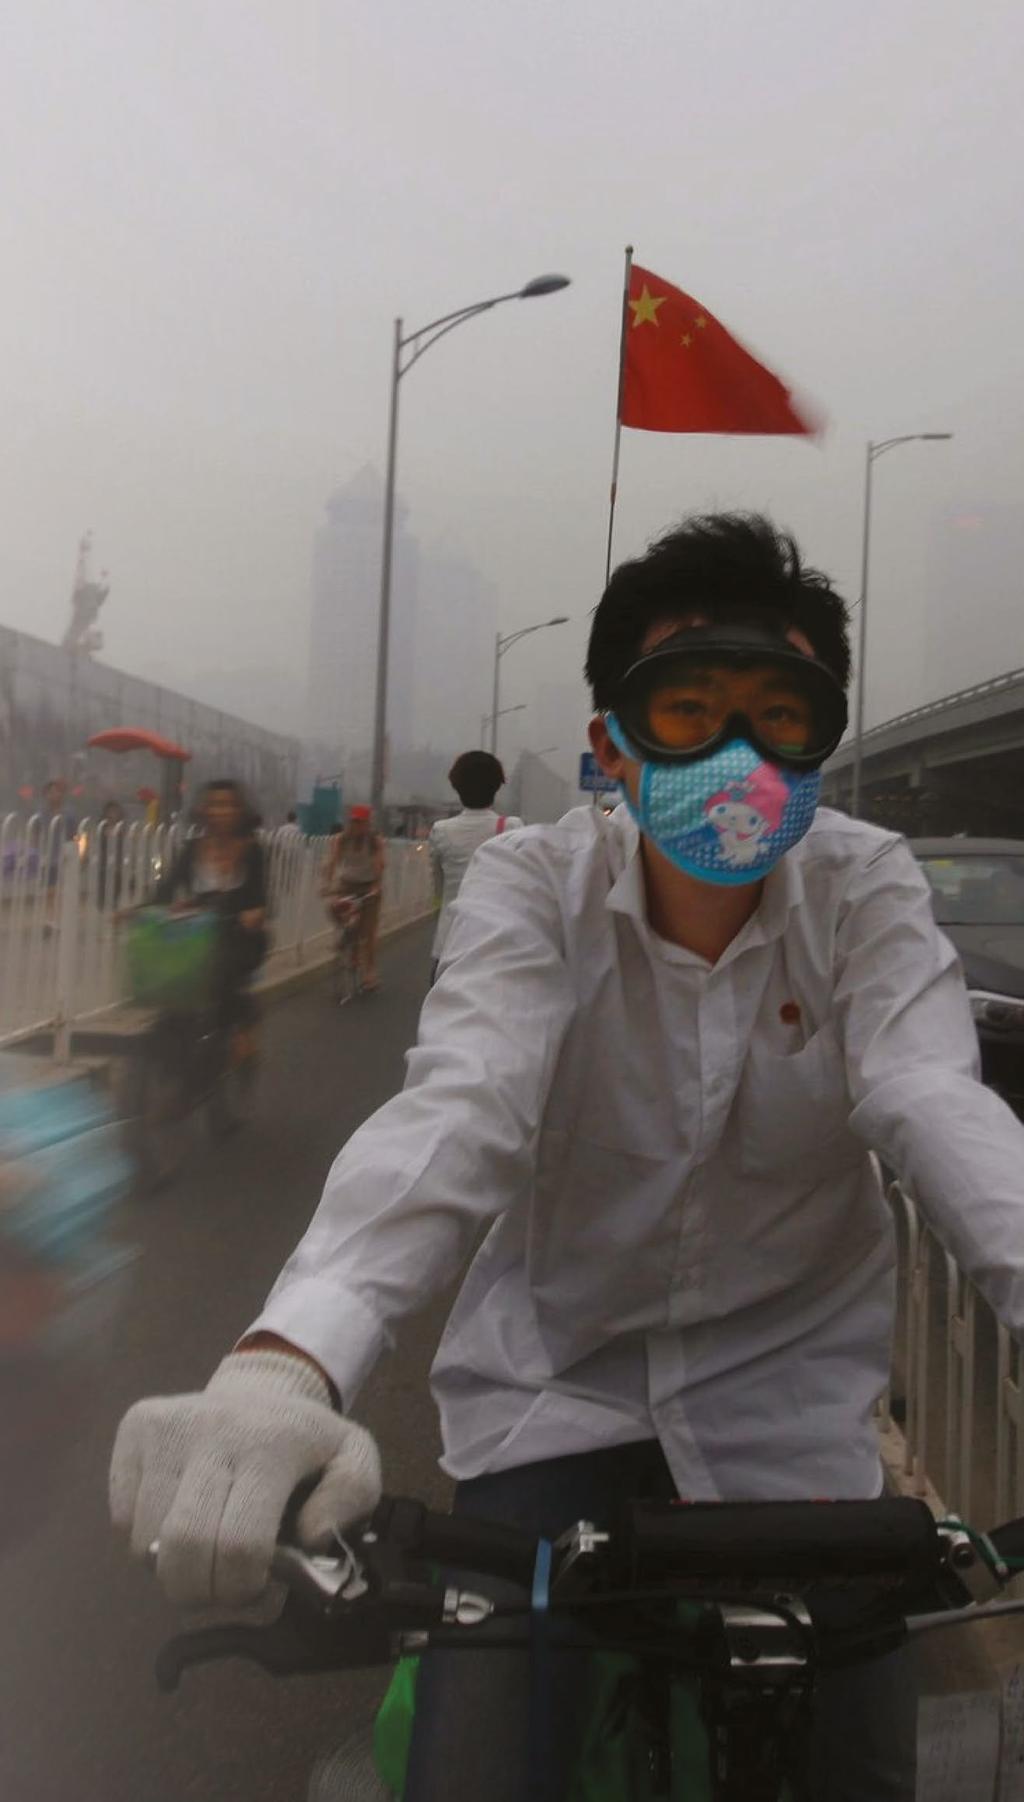 FLOODS AIR QUALITY HEATWAVES CHINA AIR QUALITY January-February 2014 An air quality index (AQI) is a number used by government agencies to communicate to the public how polluted the air currently is